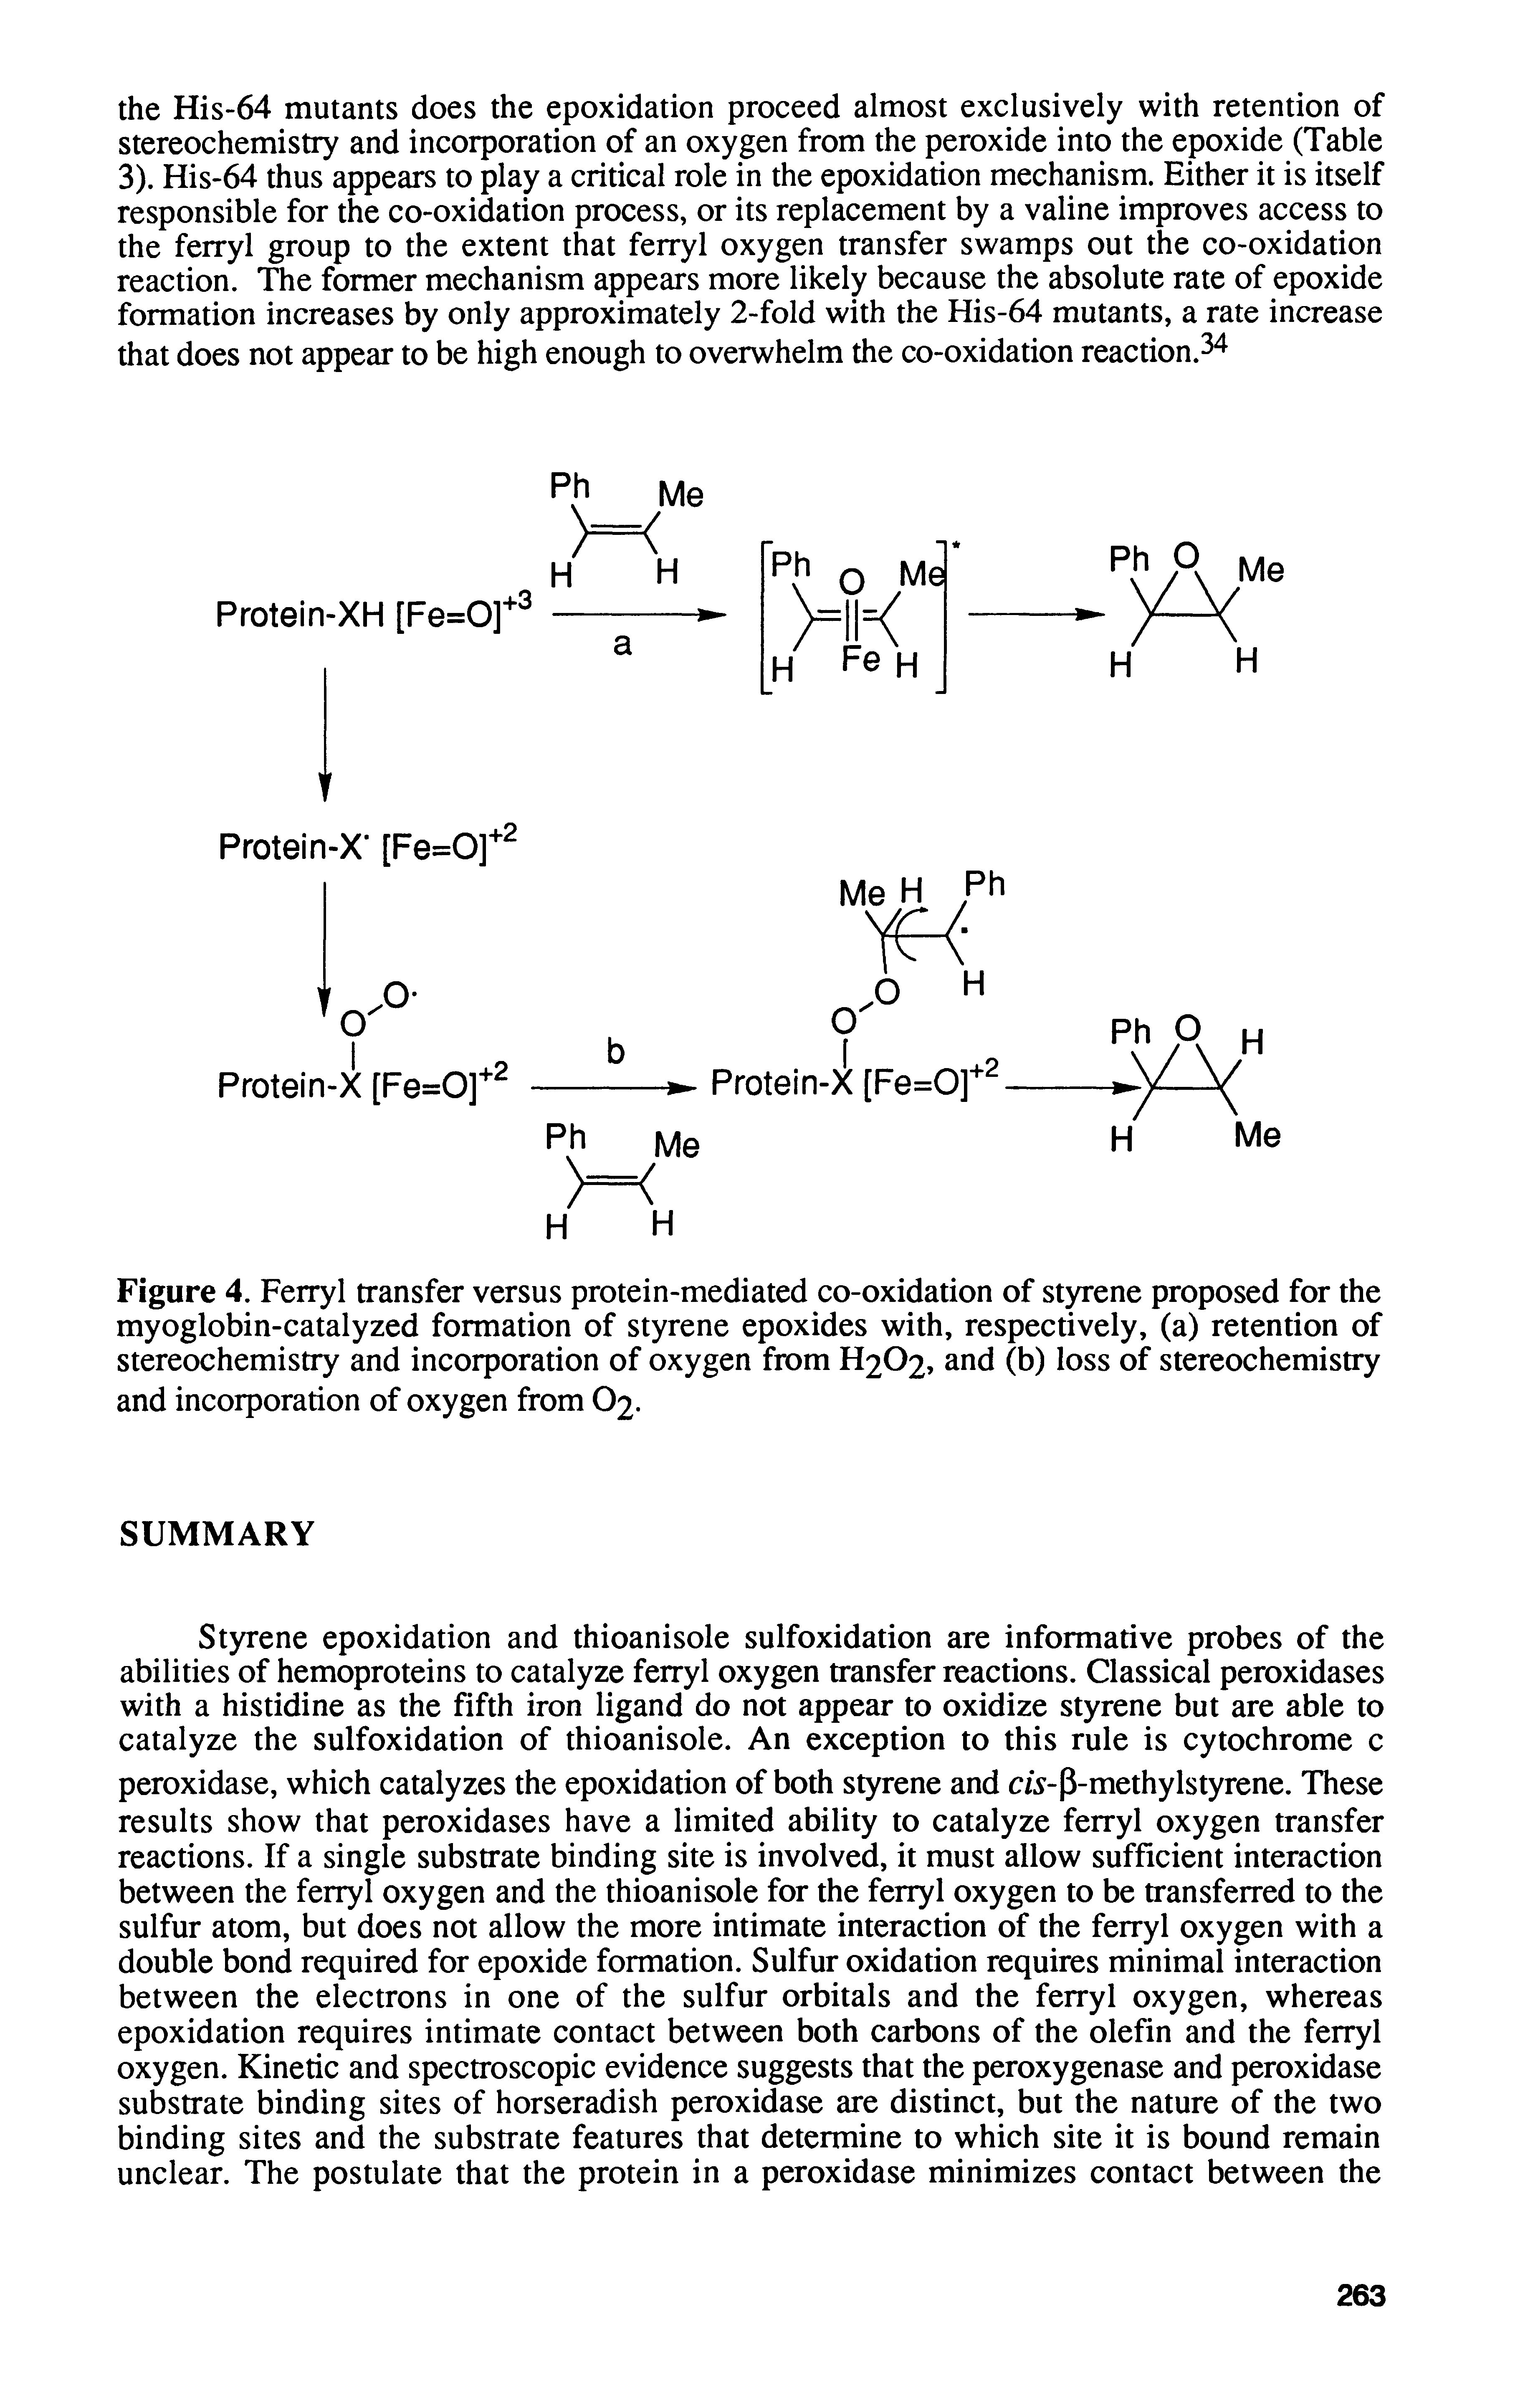 Figure 4. Ferryl transfer versus protein-mediated co-oxidation of styrene proposed for the myoglobin-catalyzed formation of styrene epoxides with, respectively, (a) retention of stereochemistry and incorporation of oxygen from H2O2, and (b) loss of stereochemistry and incorporation of oxygen from O2.